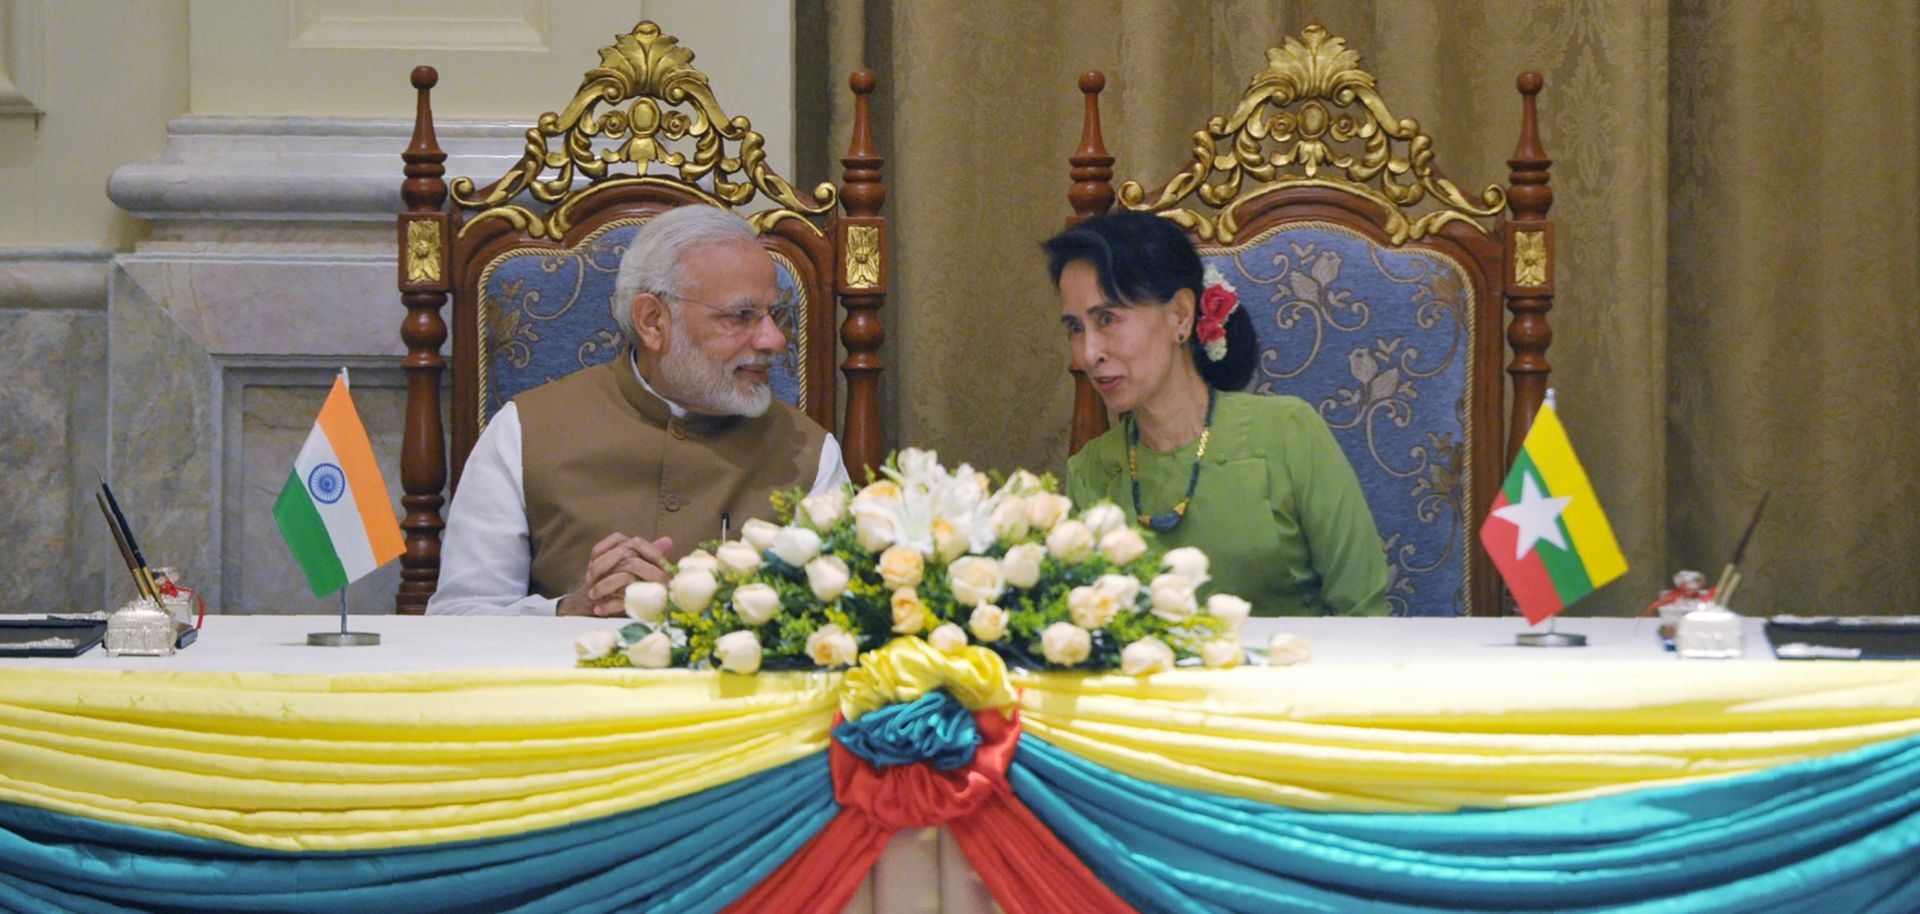 India's Prime Minister Narendra Modi visits Myanmar's State Counselor Aung San Suu Kyi in Naypyidaw on Sept. 6.